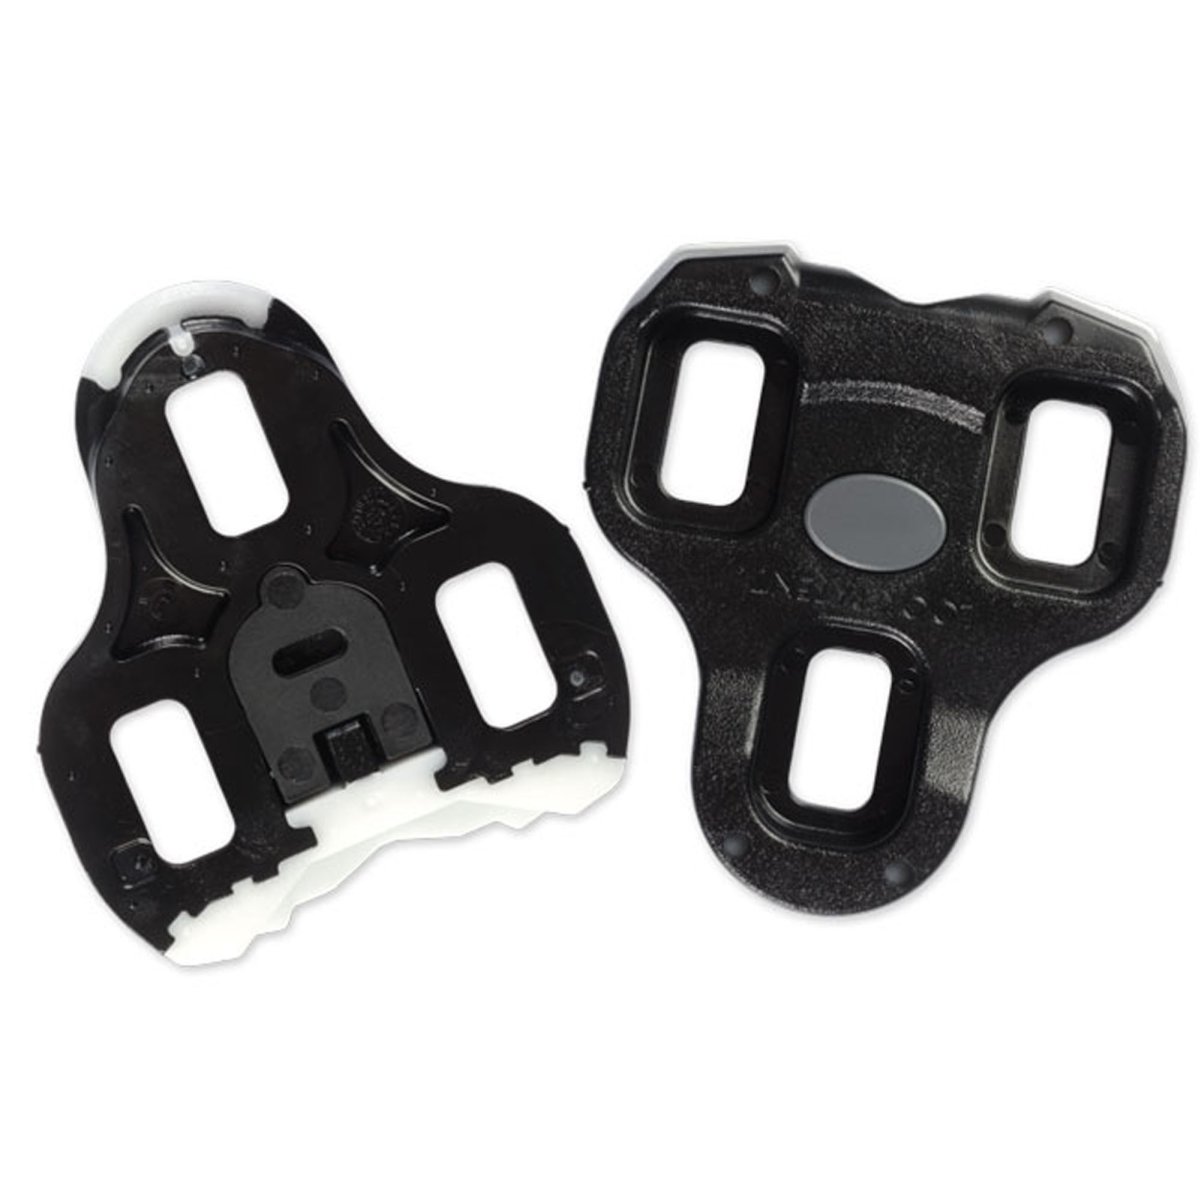 Look Keo Black Cleats - Cleats - Cycle 